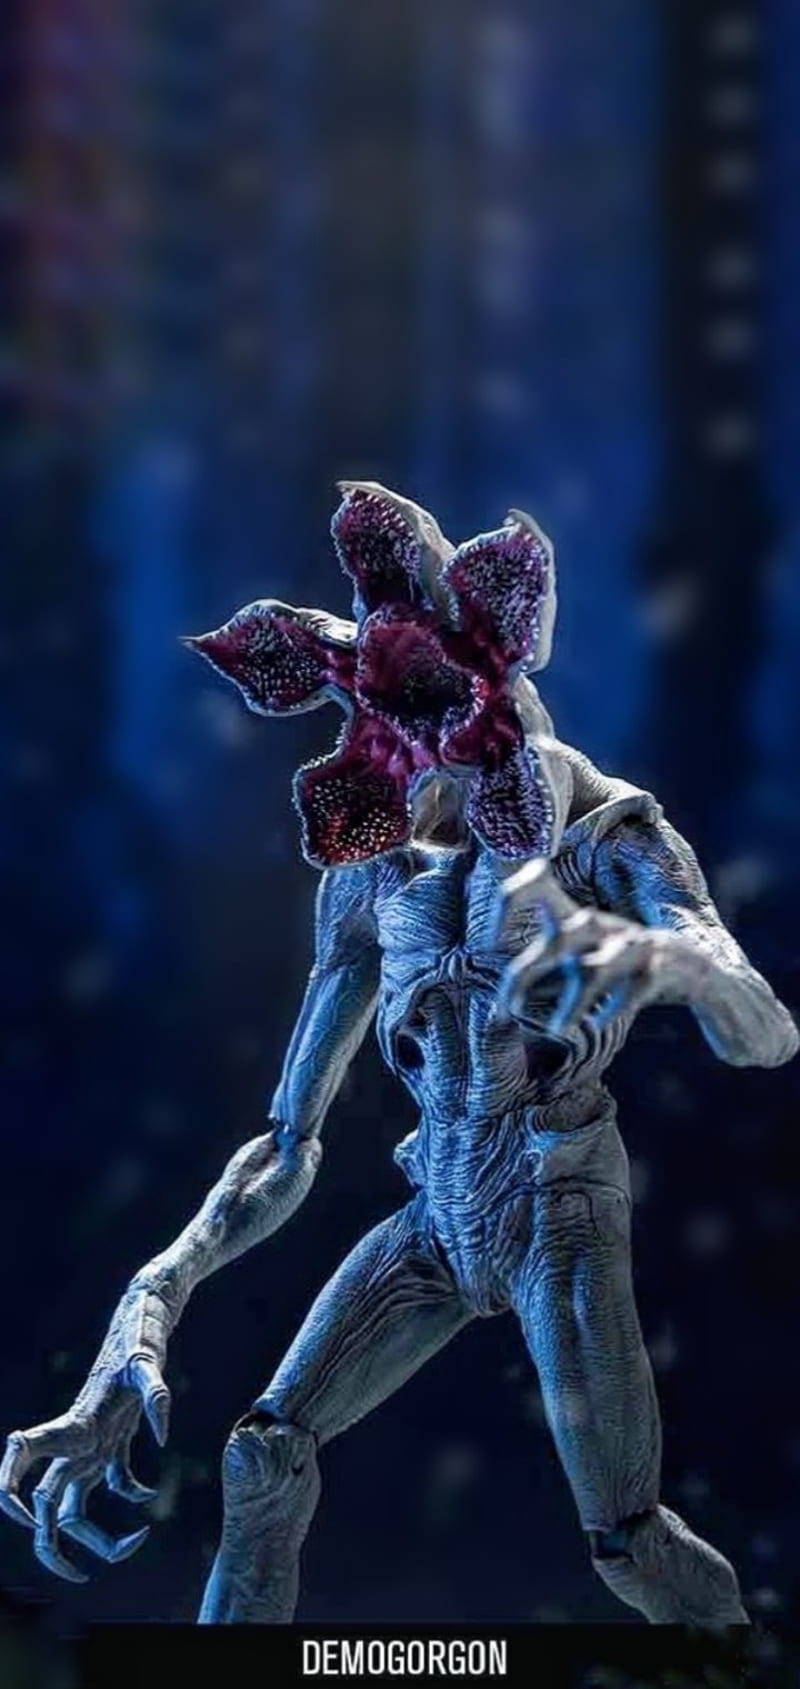 Demogorgon is coming for you Wallpaper I edited today  rStrangerThings